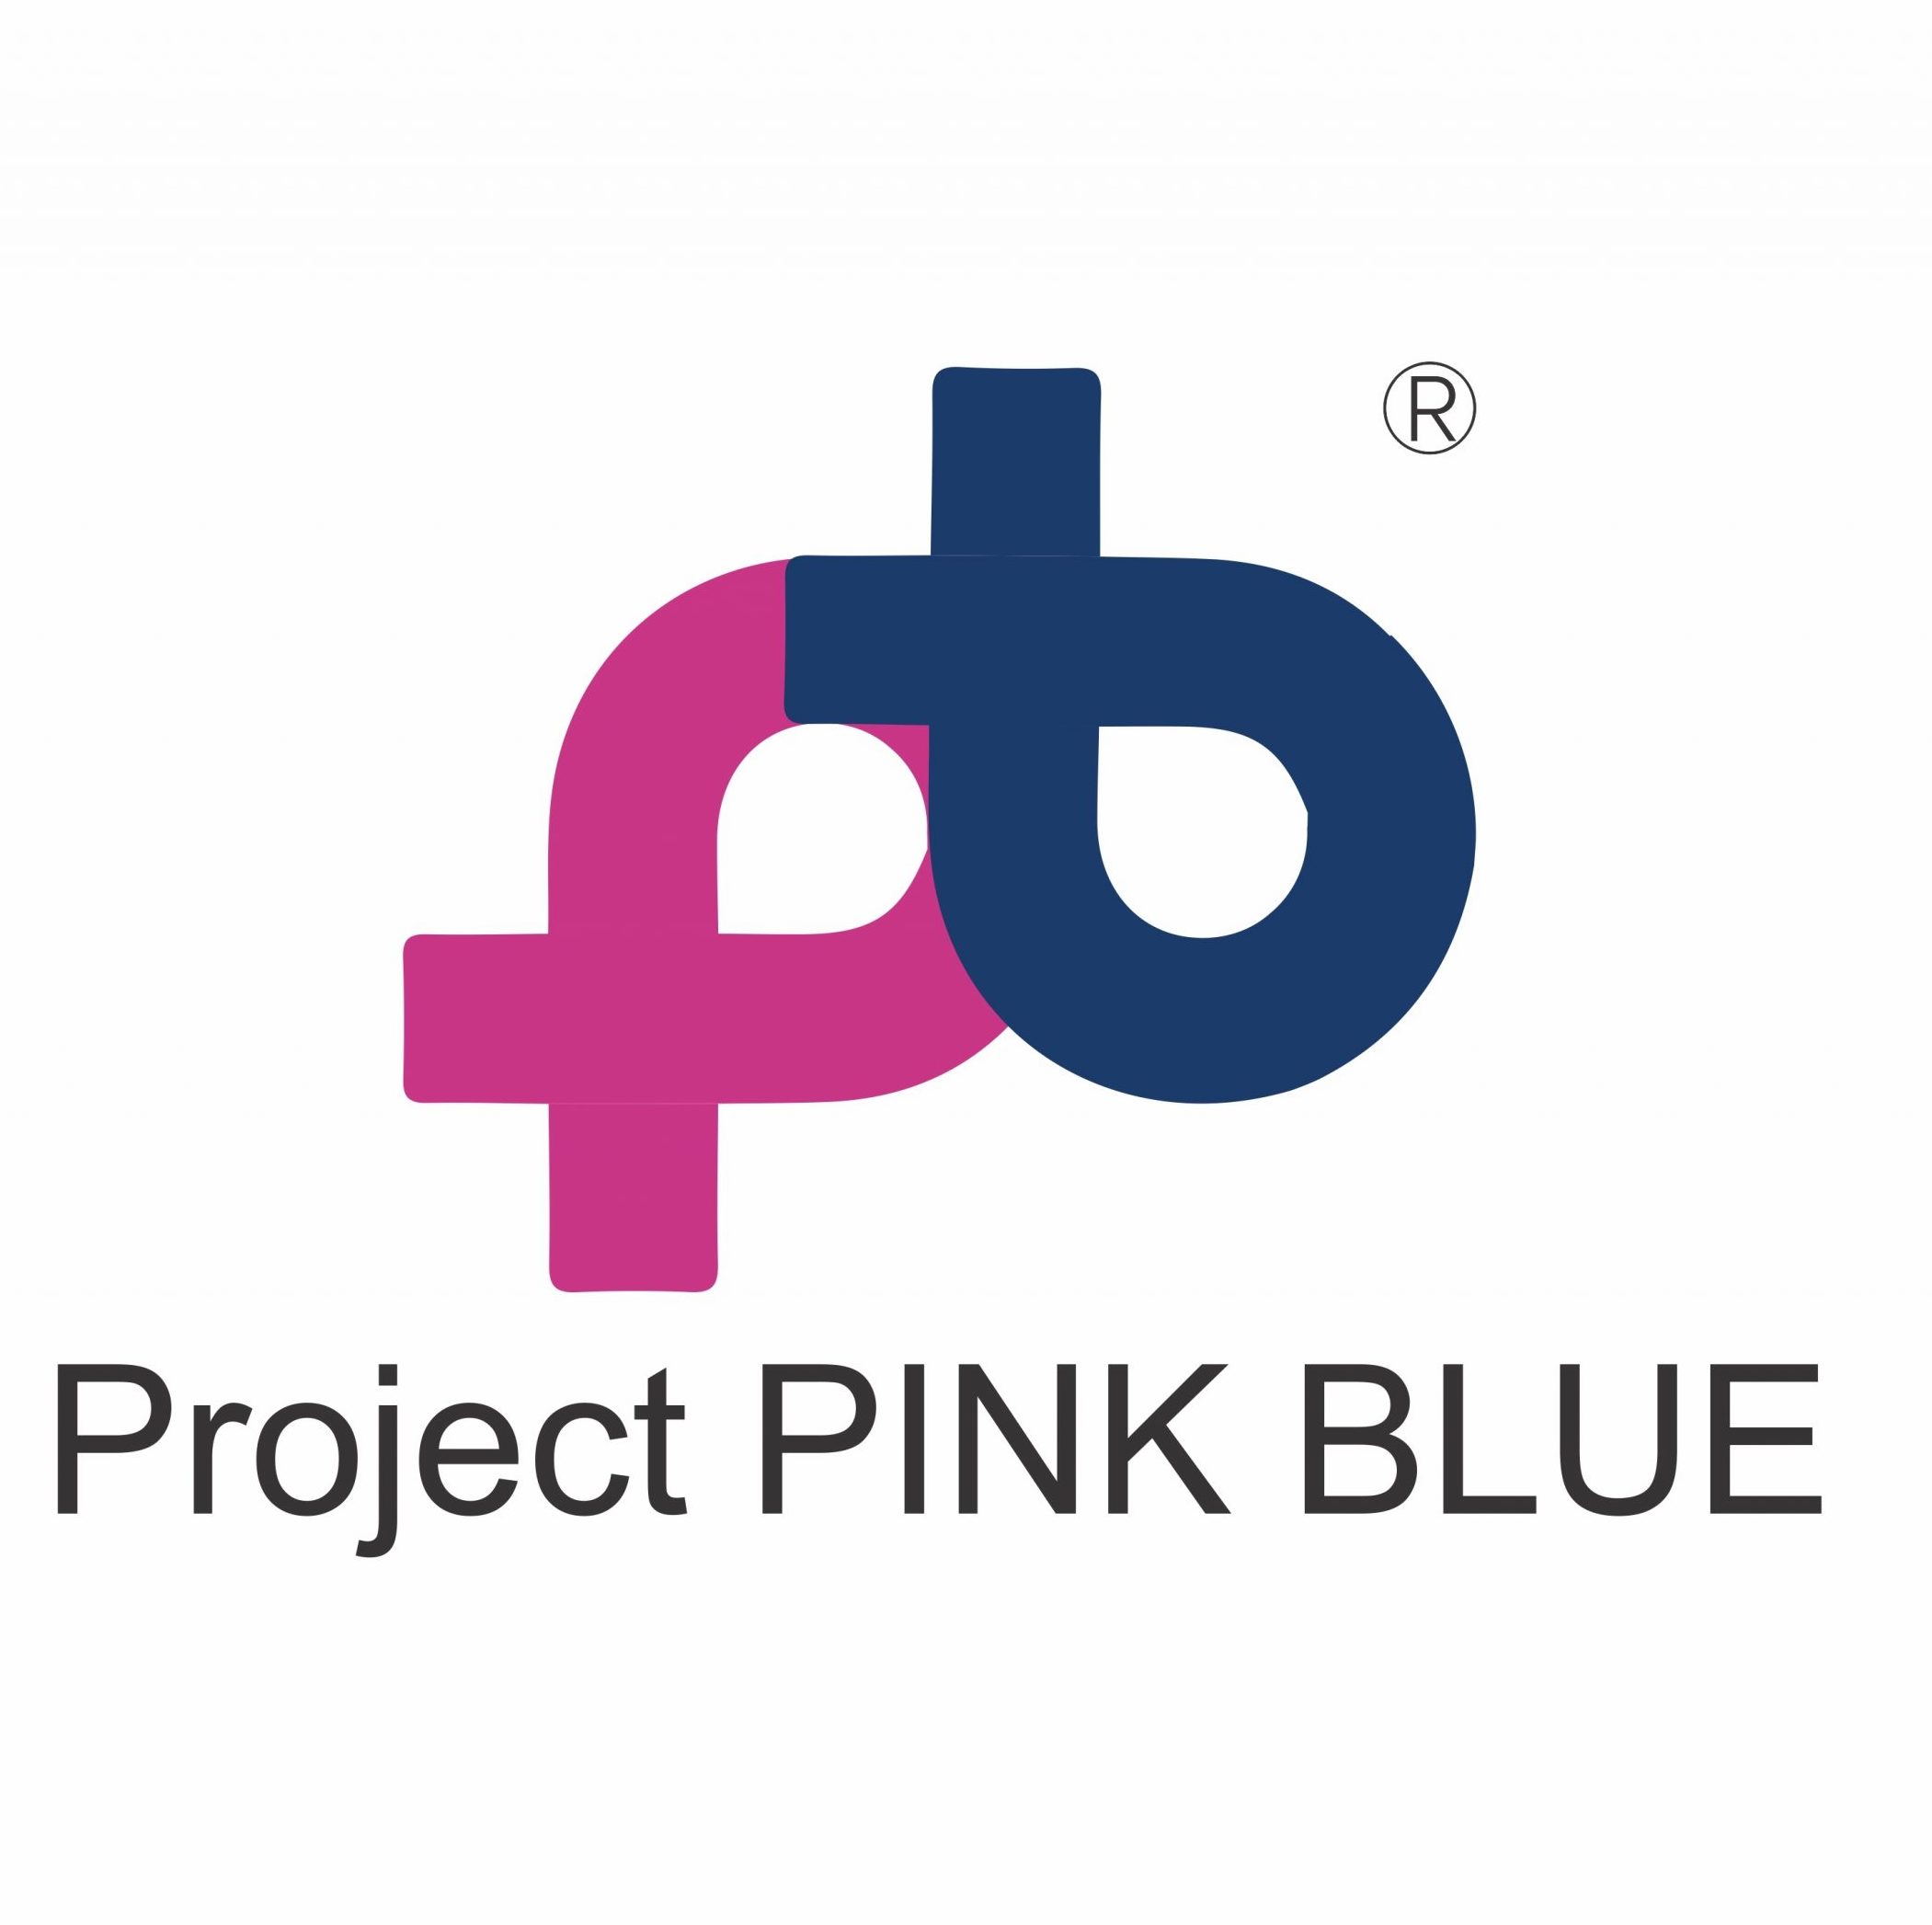 Project Pink Blue